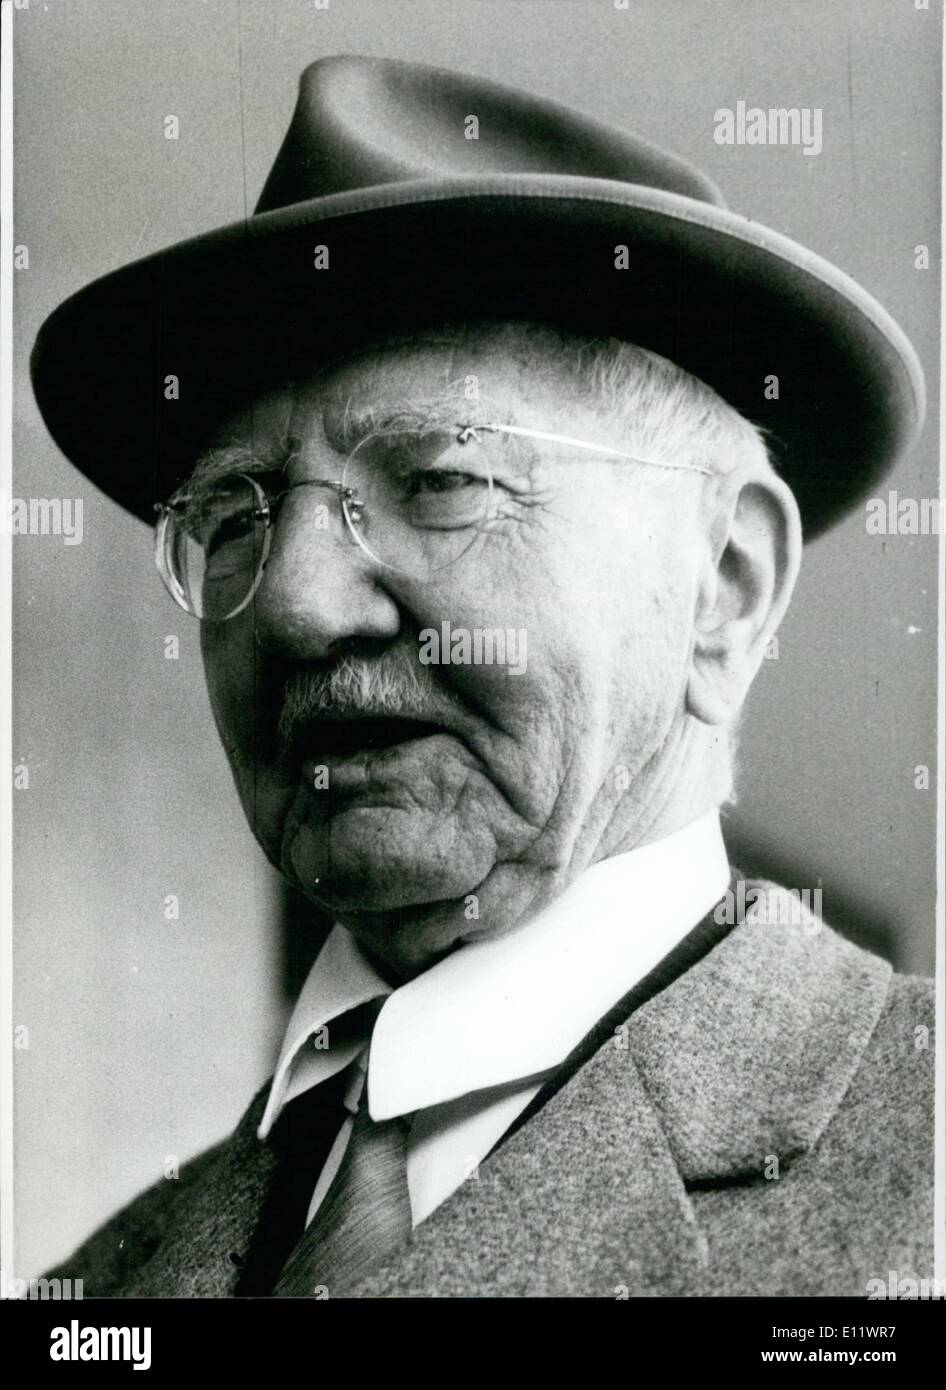 Jun. 06, 1980 - 10th Anniversary of the death of Hjalmar Schacht: Ten years ago, at June 3rd, 1970, in the age of 93 years died Stock Photo